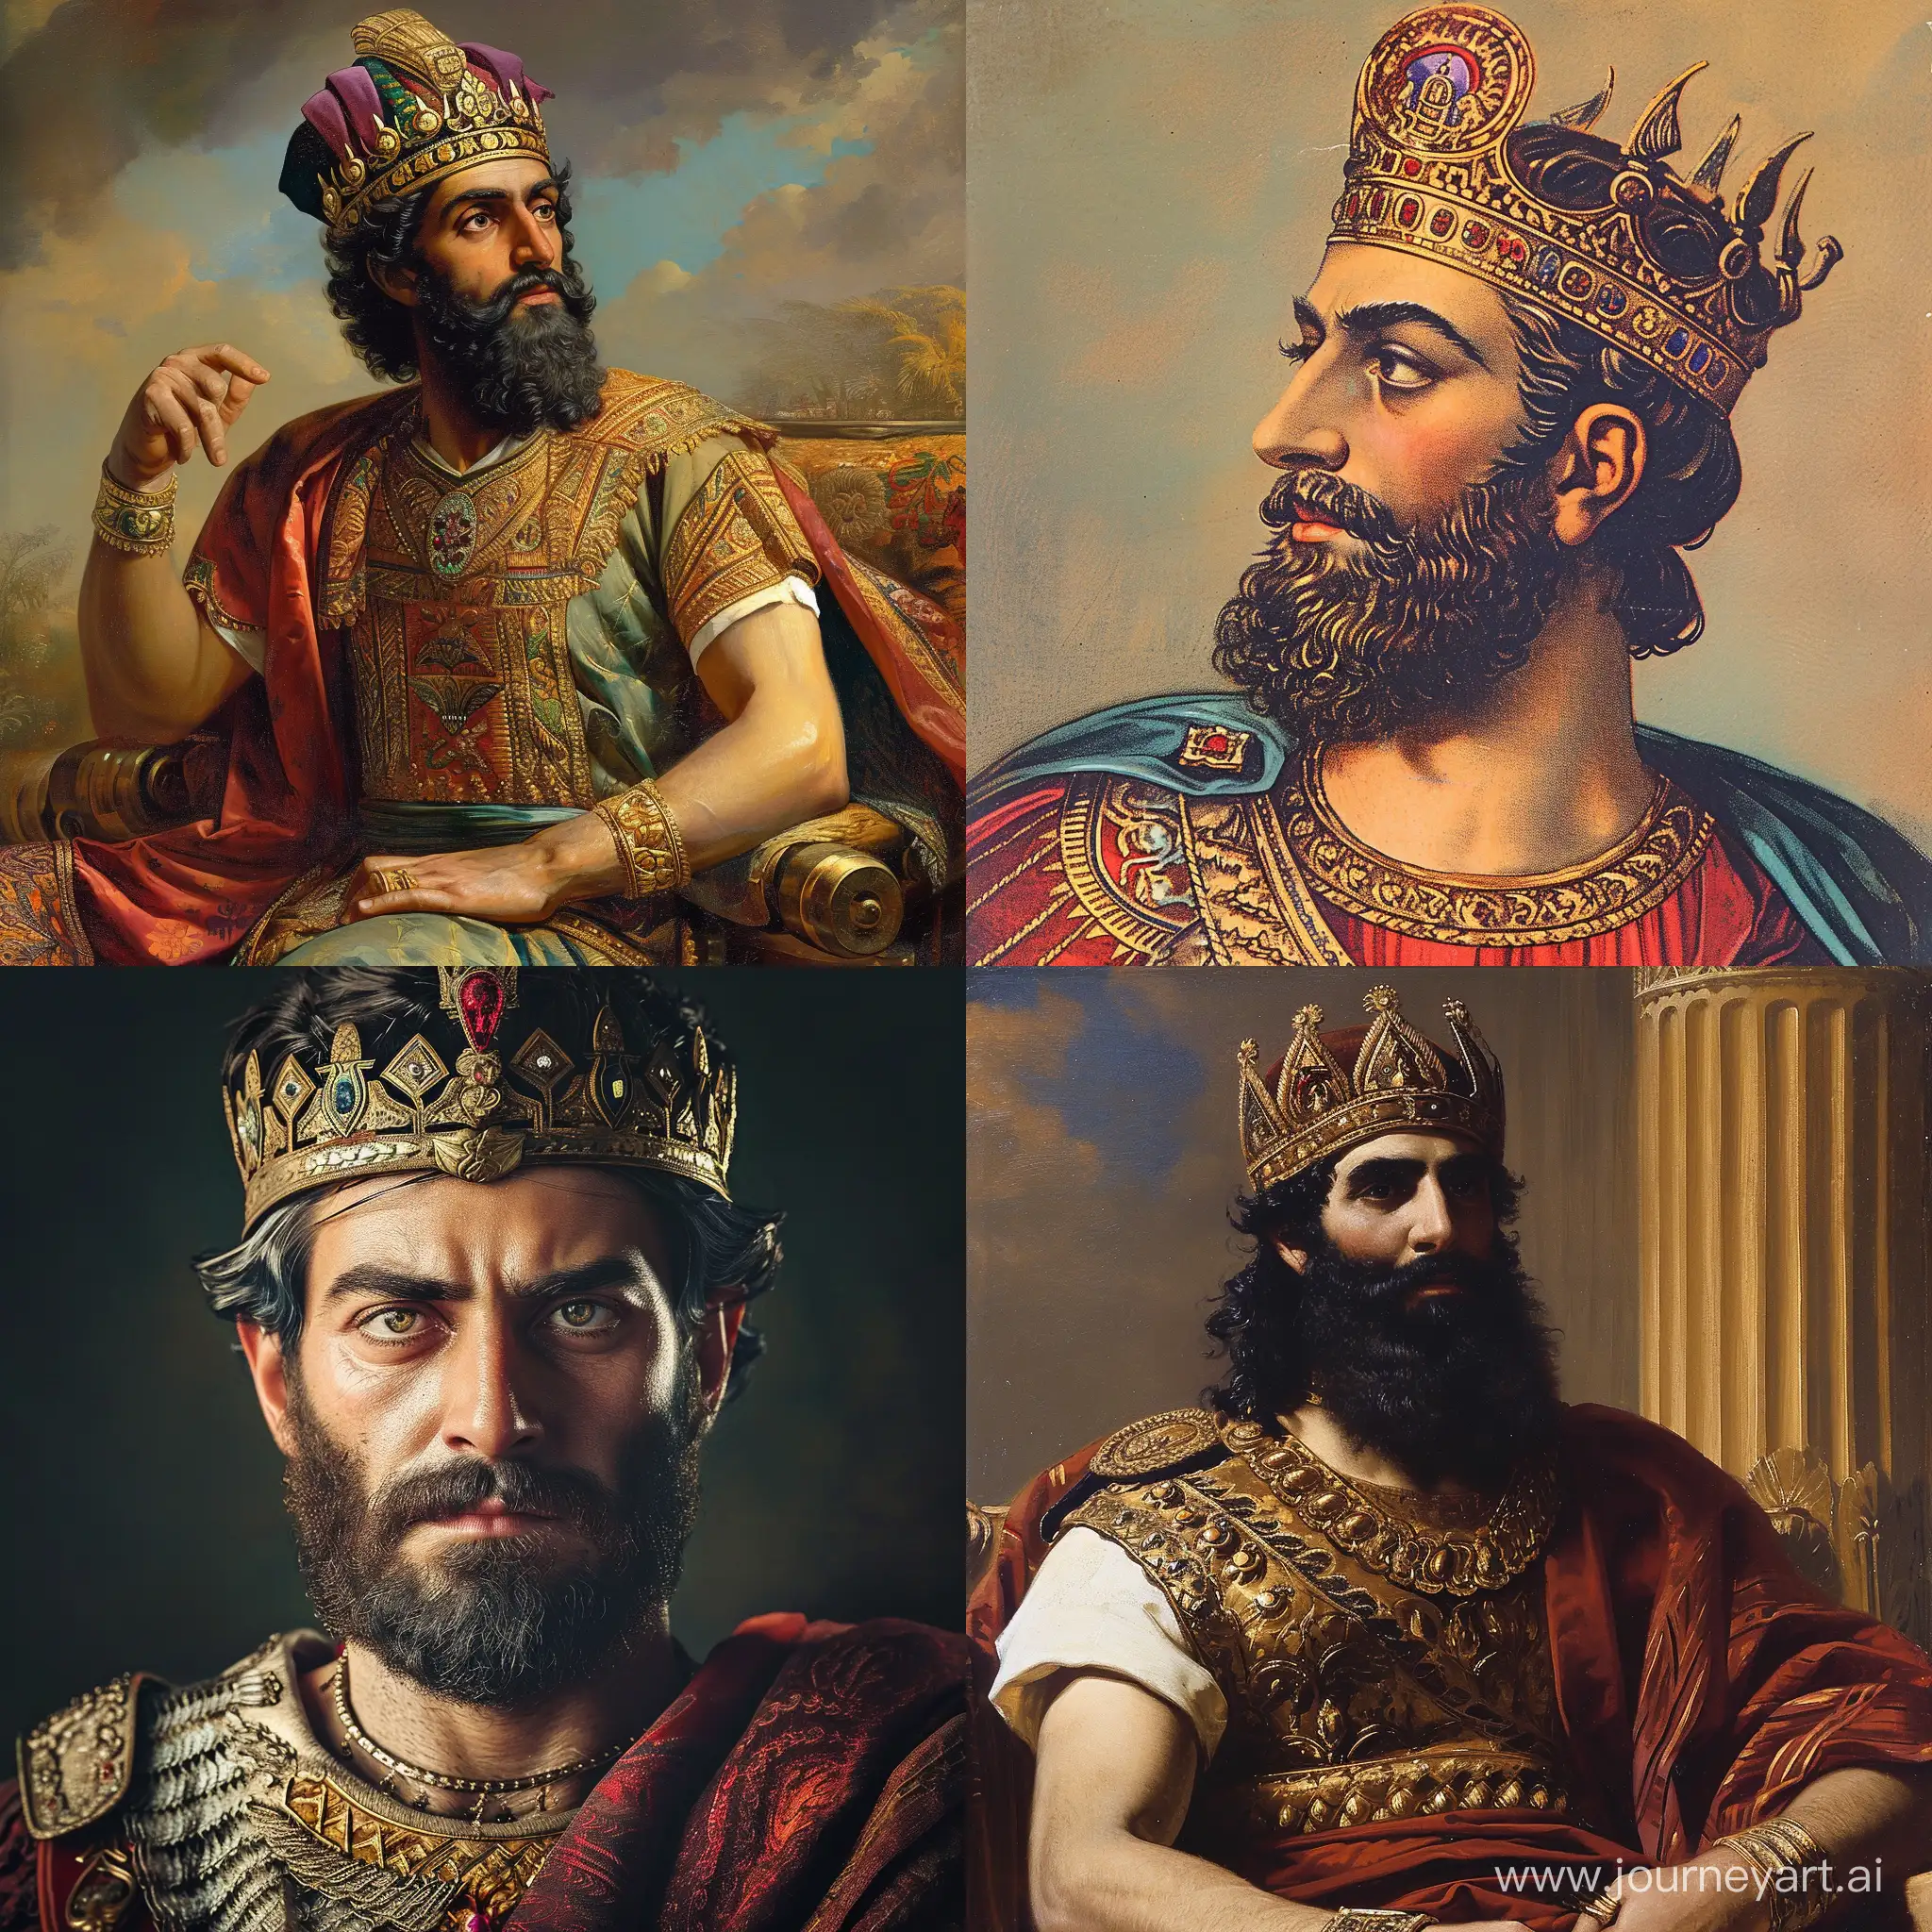 Regal-Portrait-of-King-Cyrus-in-a-11-Aspect-Ratio